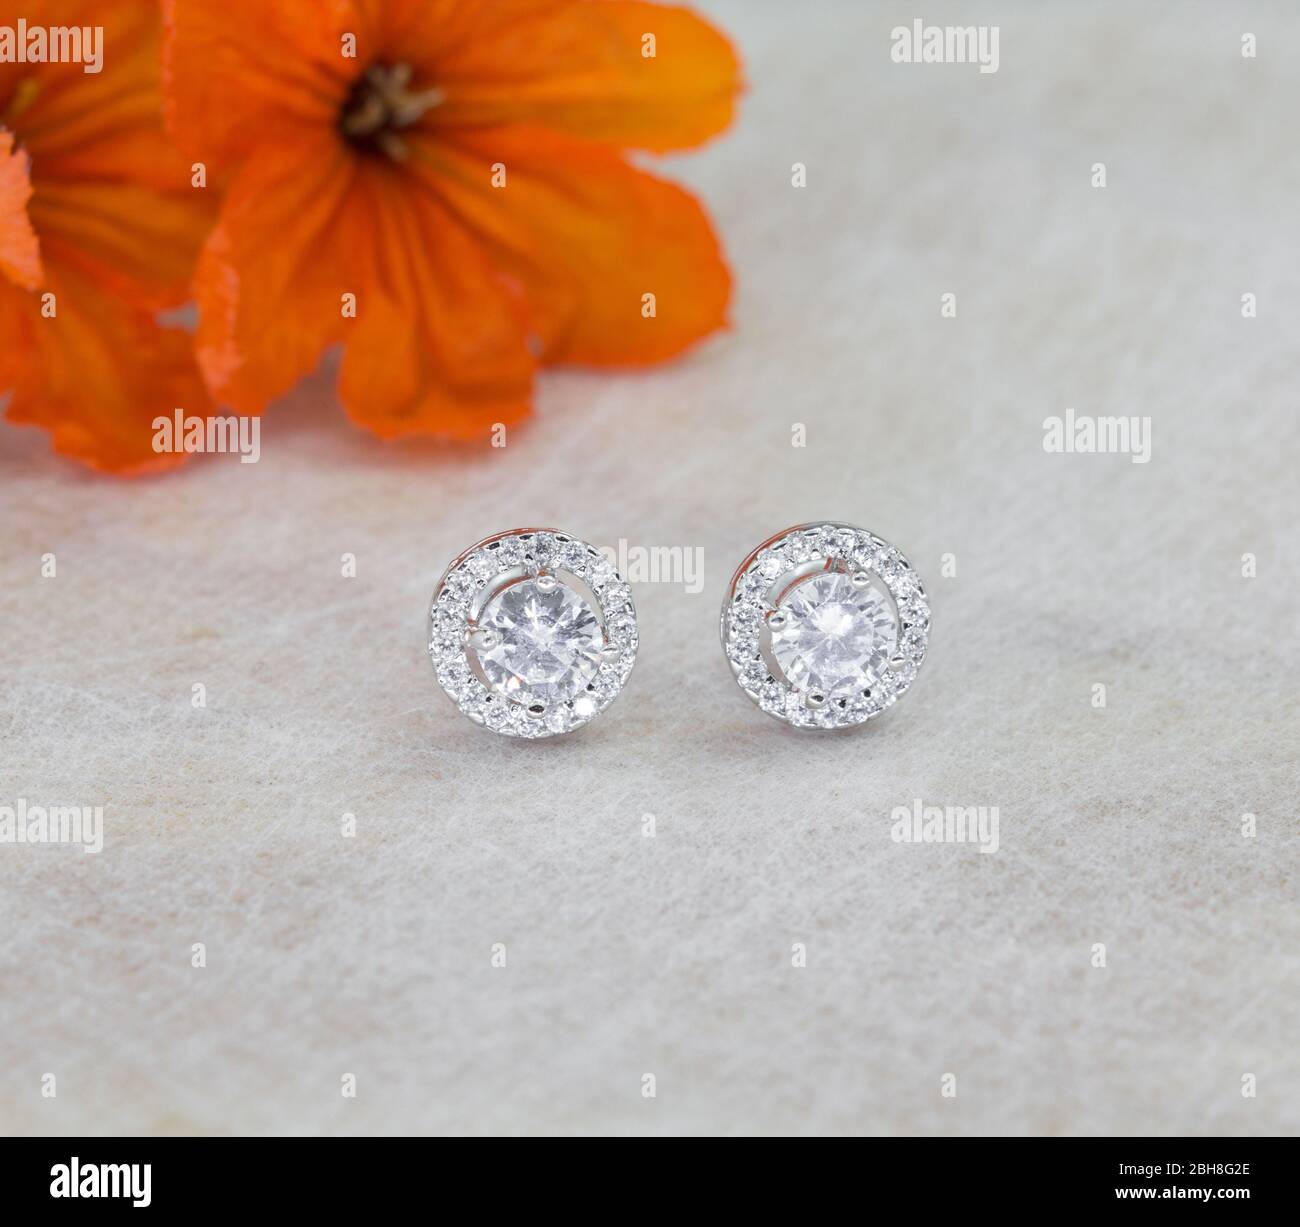 A pair of beautiful 925 sterling silver earrings with cubic zirconia isolated on gray background Stock Photo